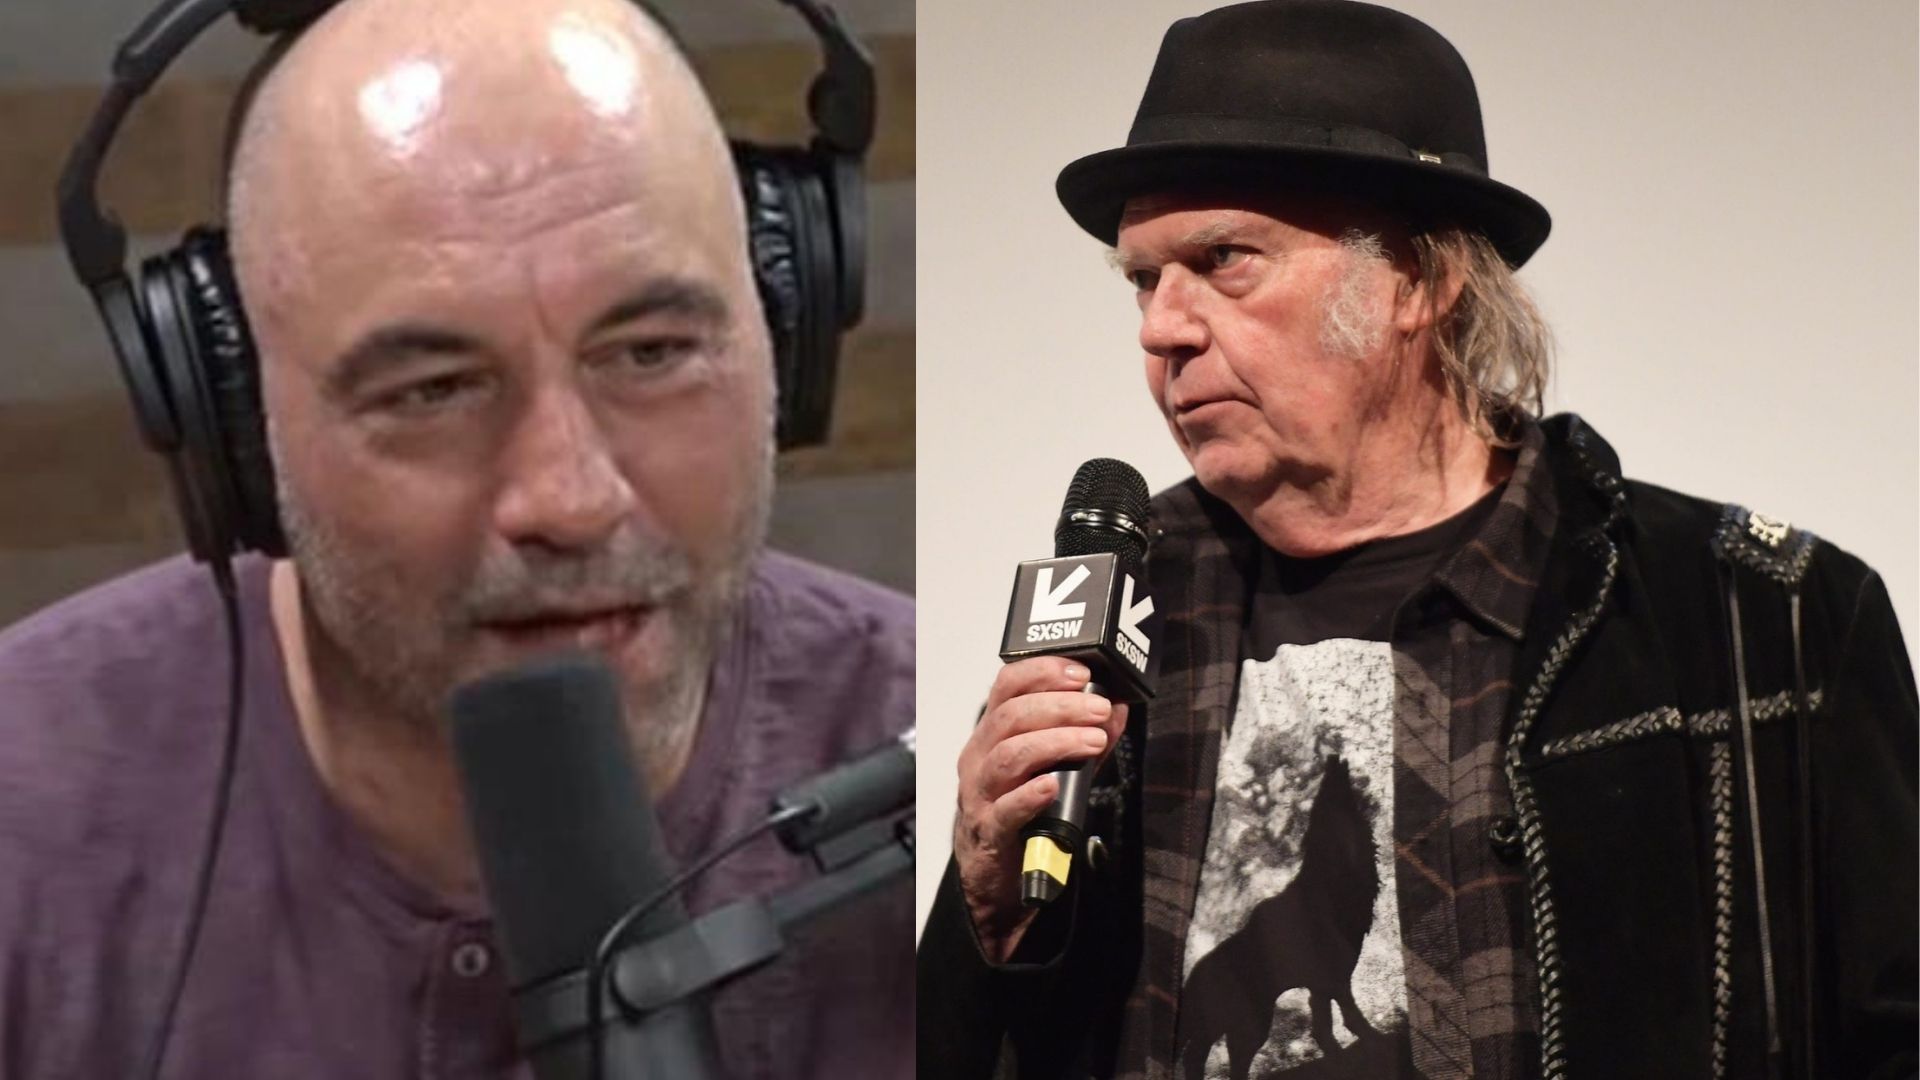 Spotify to remove Neil Young's music after artist protests Joe Rogan